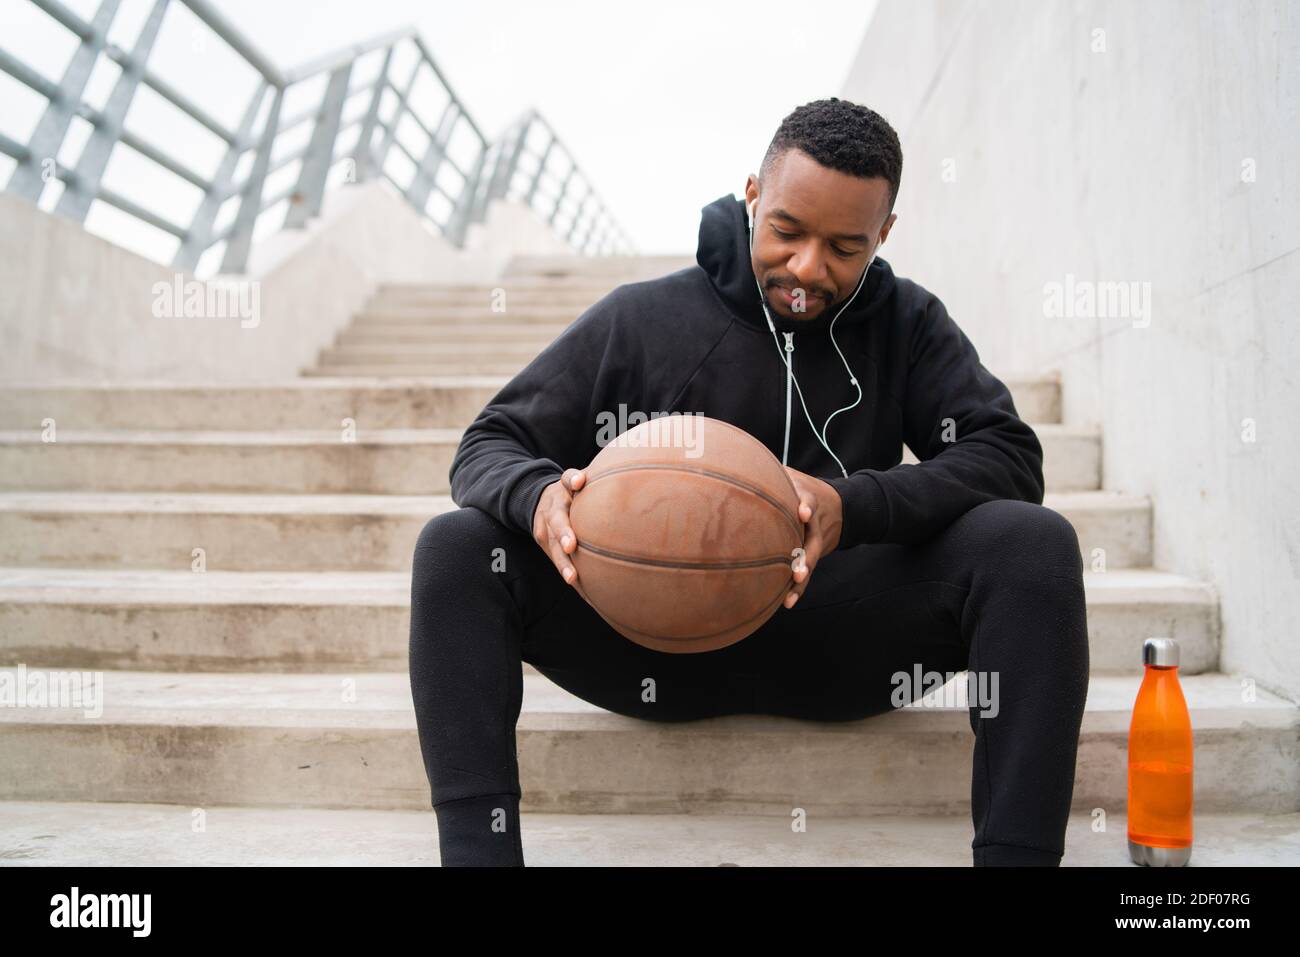 Athletic man holding a basket ball. Stock Photo